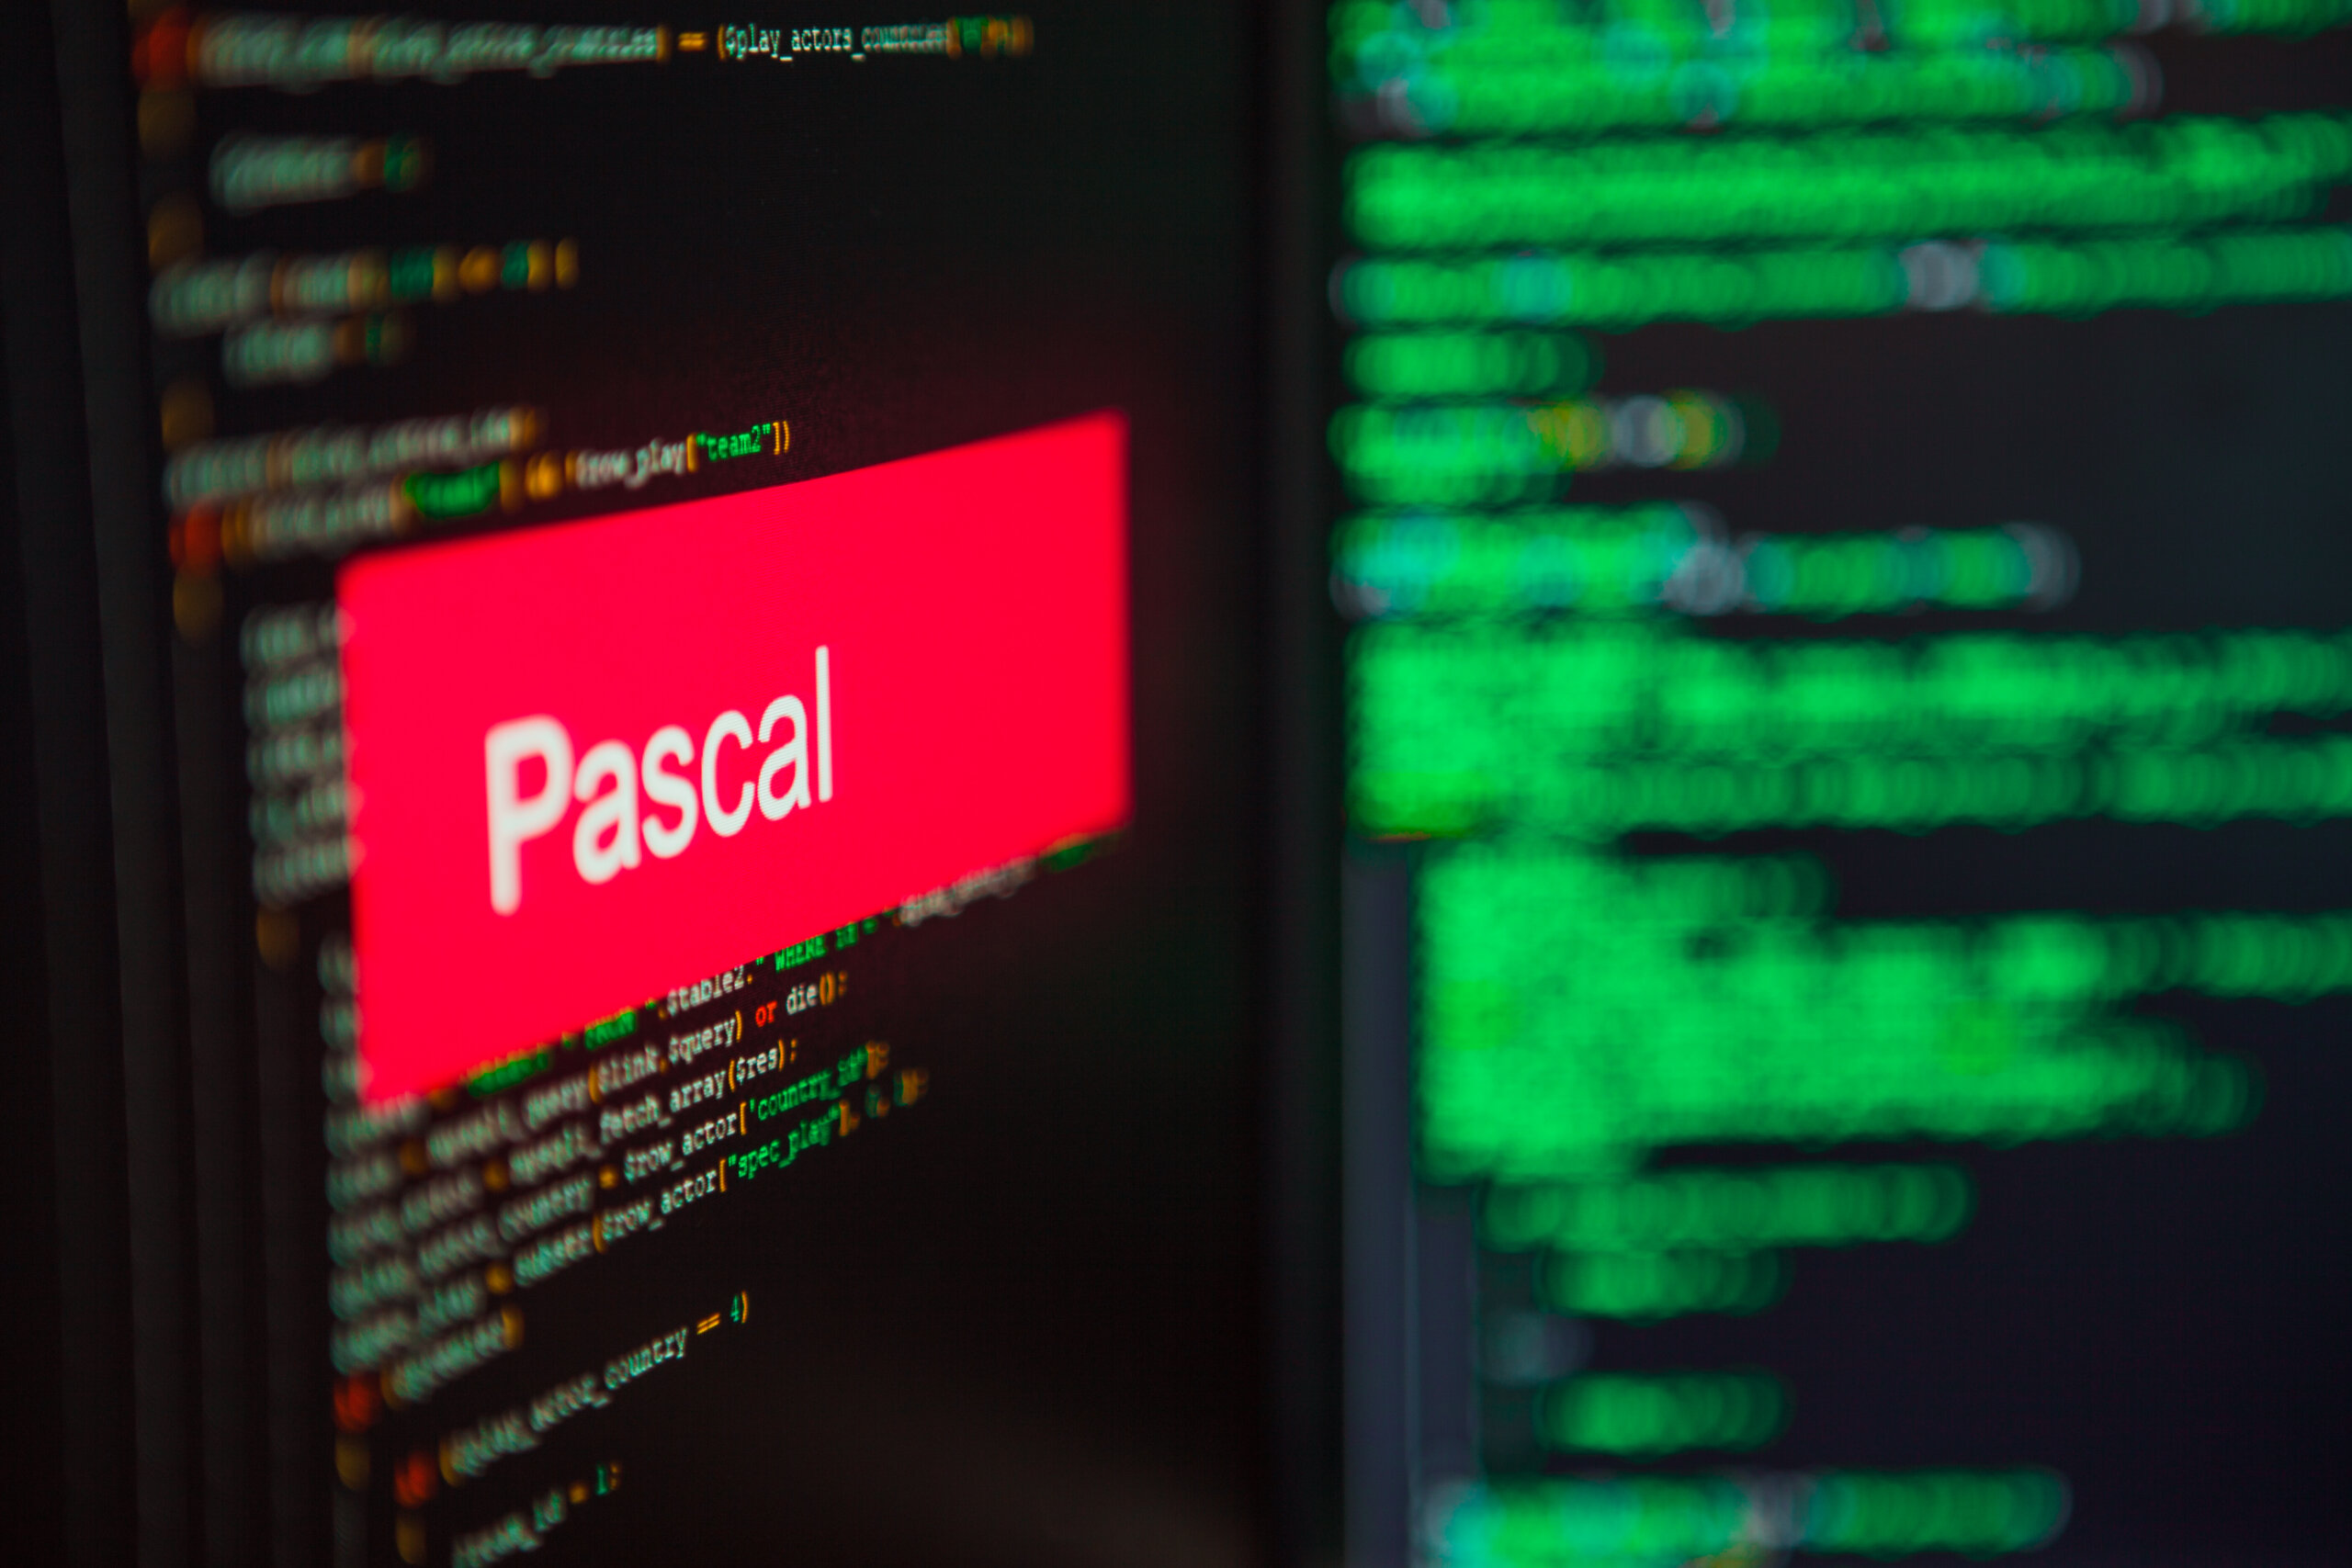 Pascal paved the way for the new programming languages.